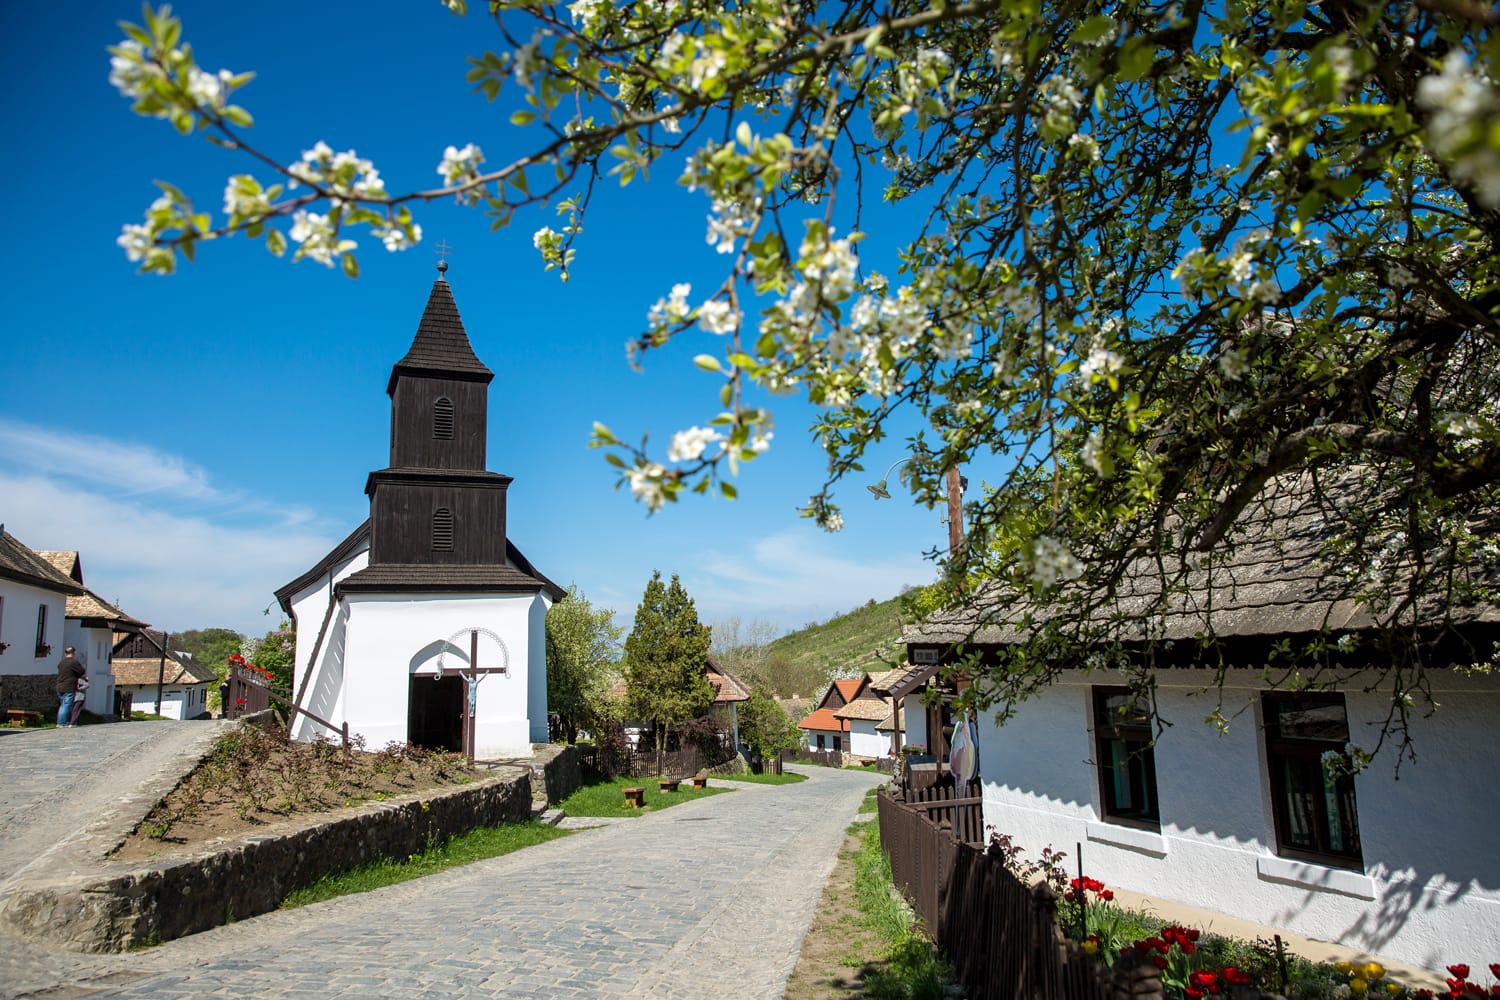 Holloko is a traditional village in Hungary